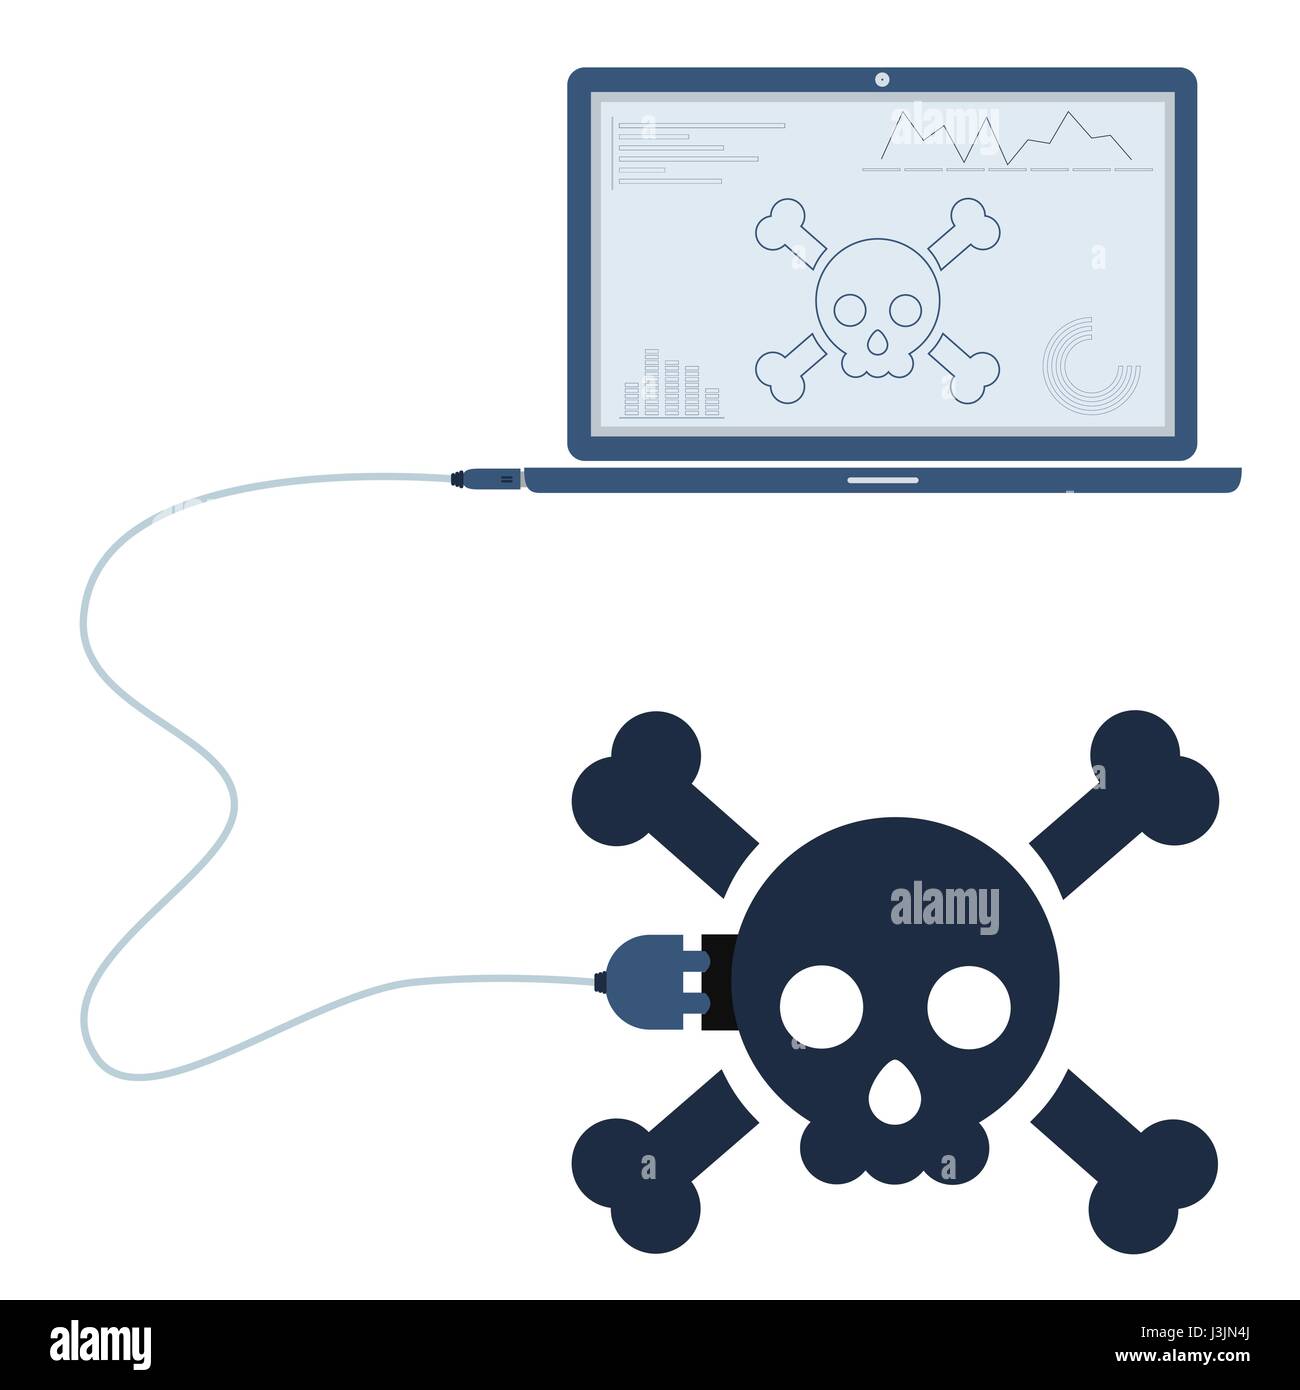 Skull symbol connected to a laptop through a usb cable. Outline of the skull and graphs being shown on the computer monitor. Flat design. Isolated. Stock Vector